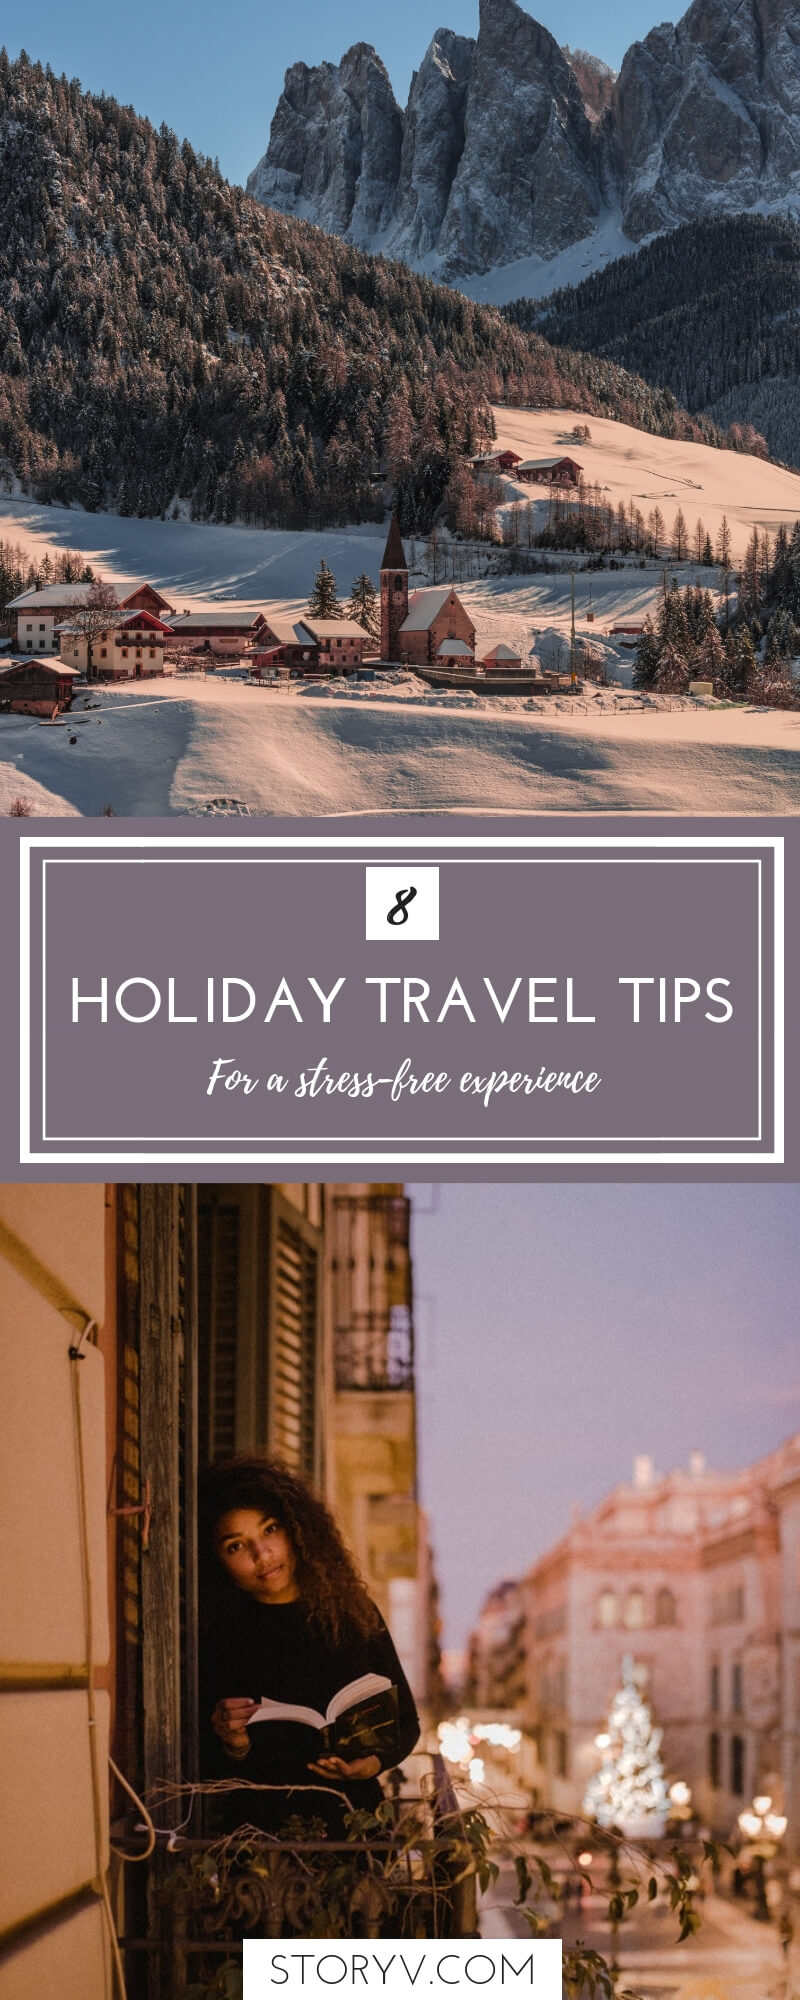 From avoiding the busy Christmas rush to spending time with your loved ones, these 8 tips will help you enjoy a stress-free travel experience these holidays